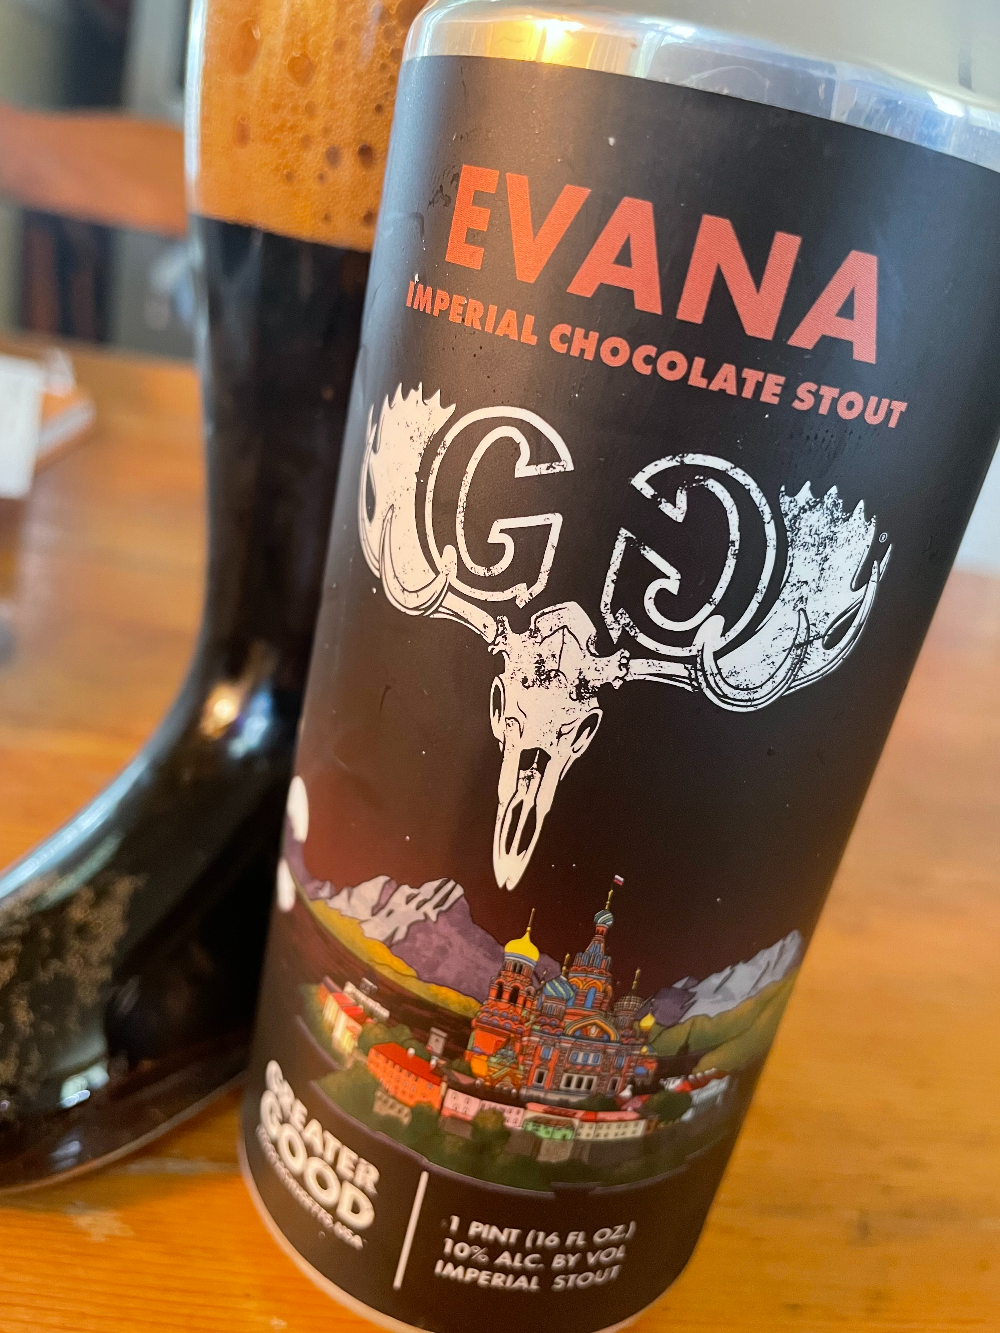 Sonic Beer Blog #1: Greater Good Evana Imperial Chocolate Stout